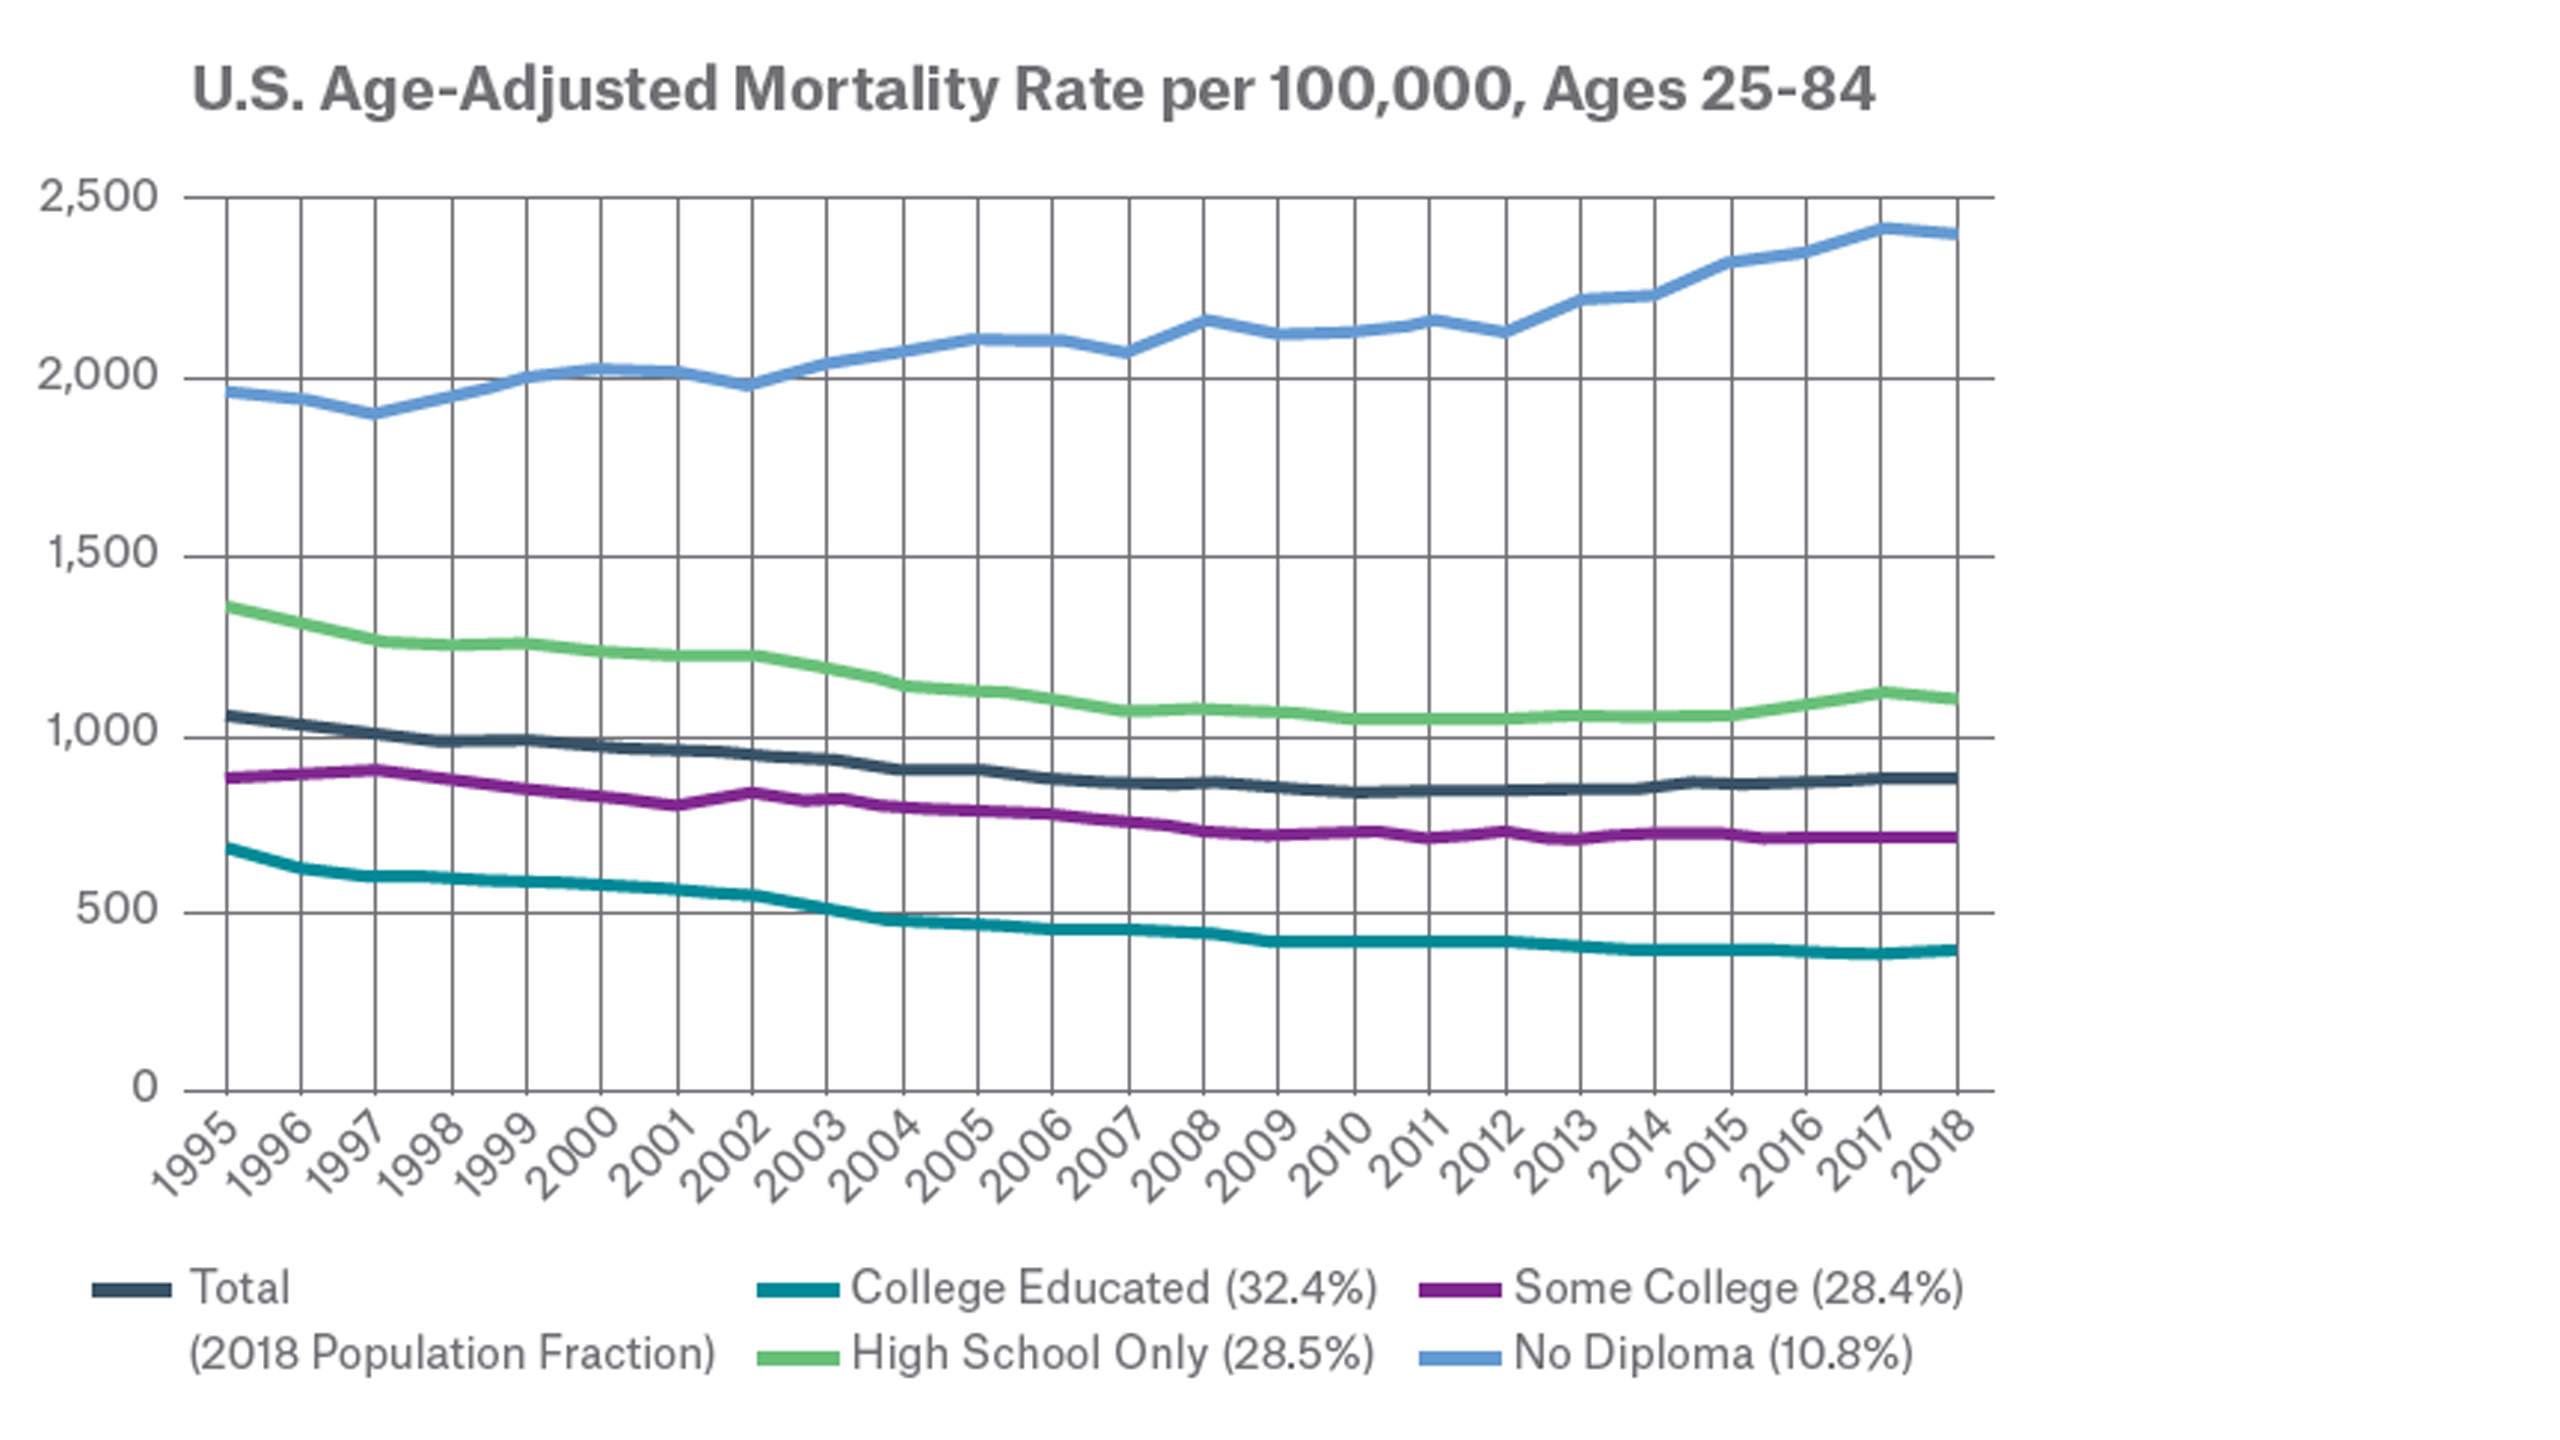 U.S. Age-Adjusted Mortality Rate per 100,000: Ages 25-84